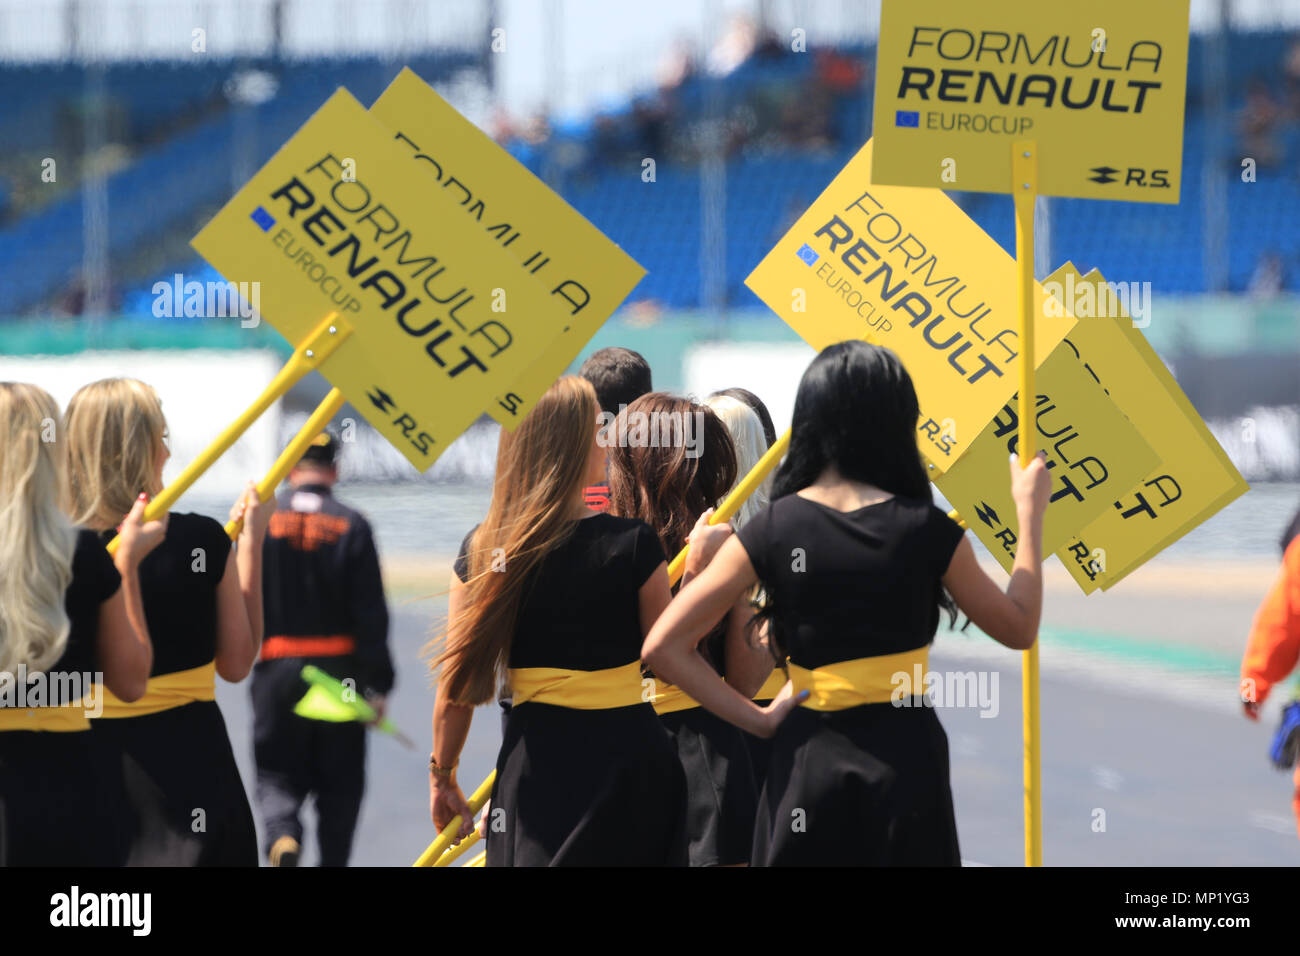 Pour les passionnés d'automobiles - Page 7 Silverstone-united-kingdom-20th-may-2018-grid-girls-make-their-way-for-the-start-of-race-2-for-the-formula-renault-eurocup-20-credit-paren-ravalalamy-live-news-MP1YG3